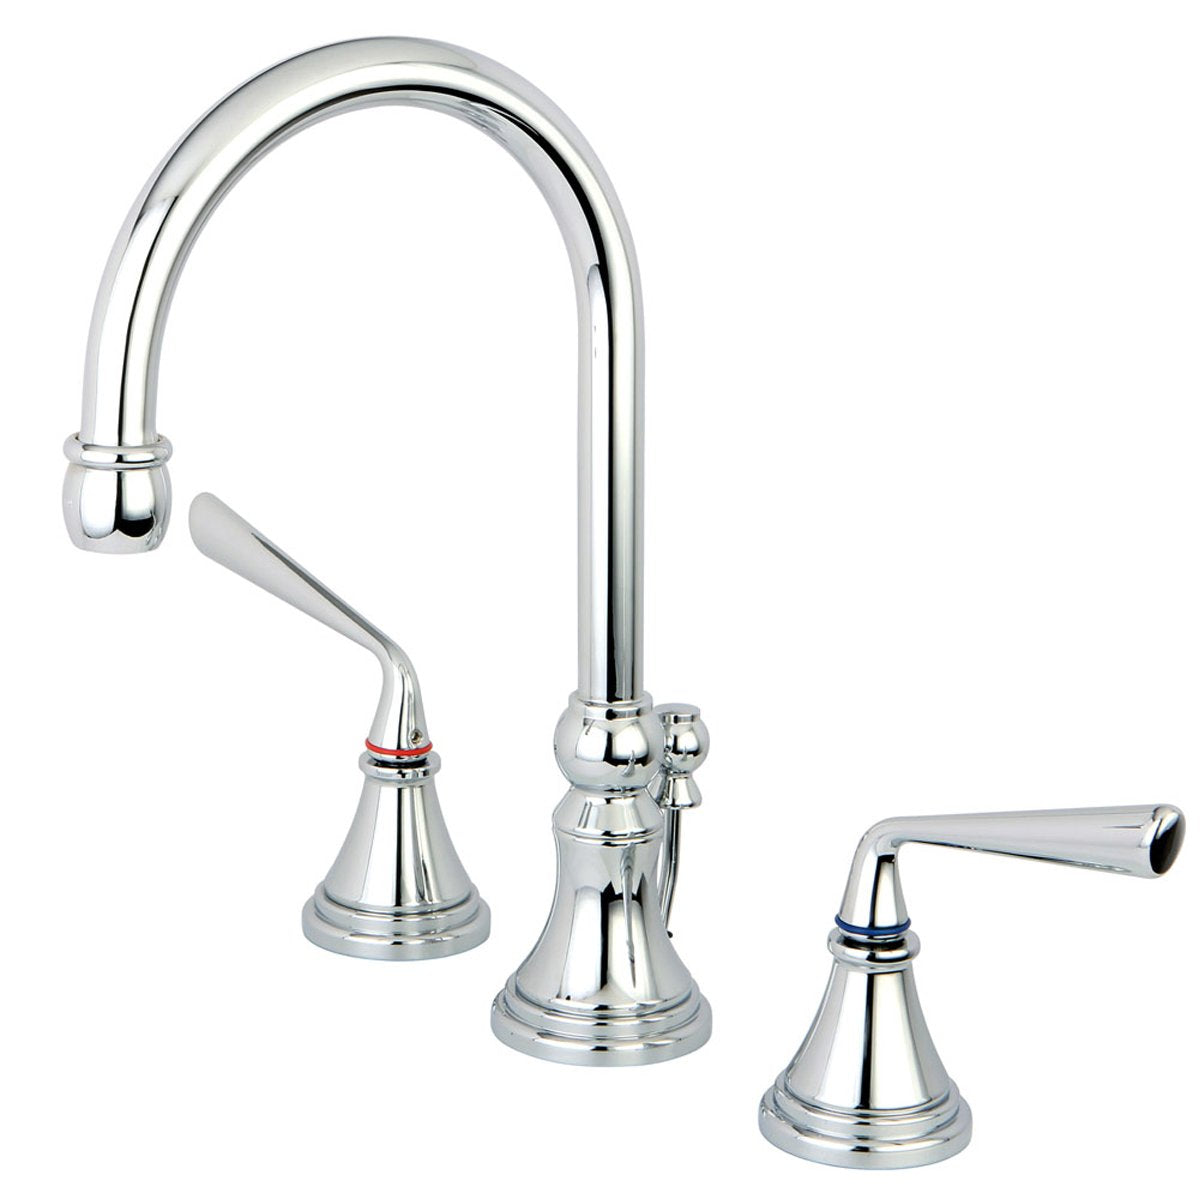 Kingston Brass Silver Sage Widespread ADA Lavatory Faucet-Bathroom Faucets-Free Shipping-Directsinks.